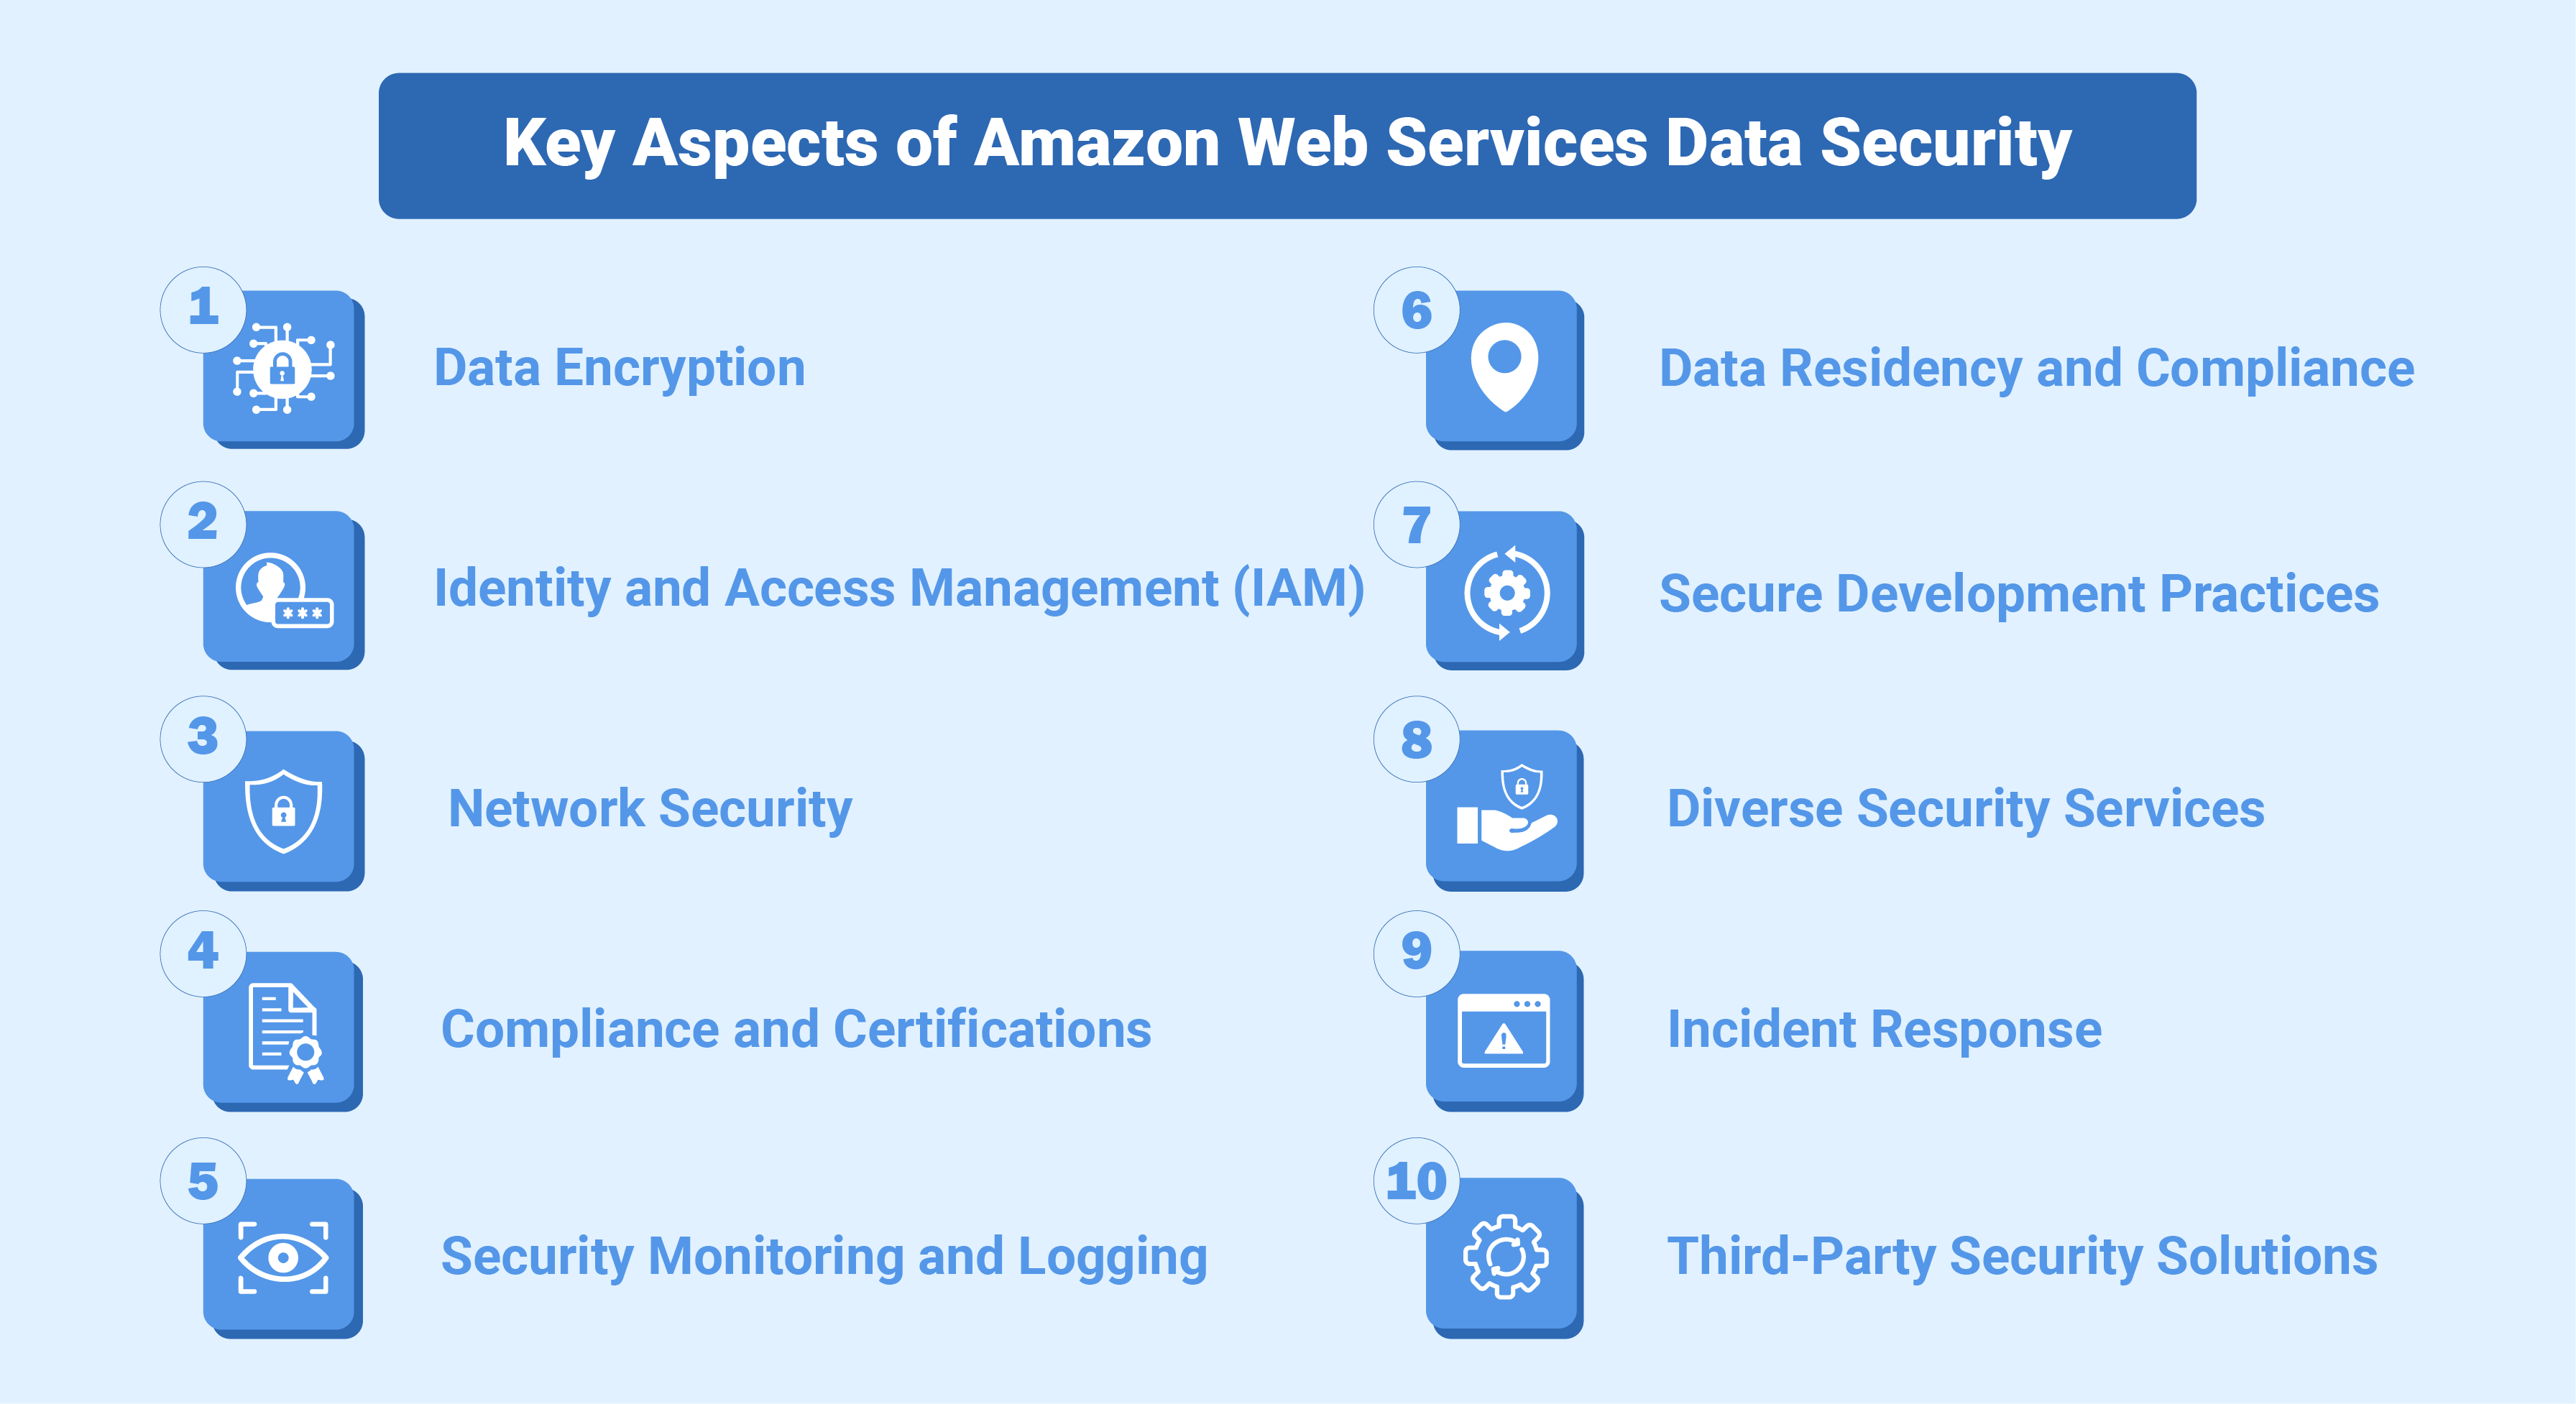 Key Aspects of Amazon Web Services Data Security